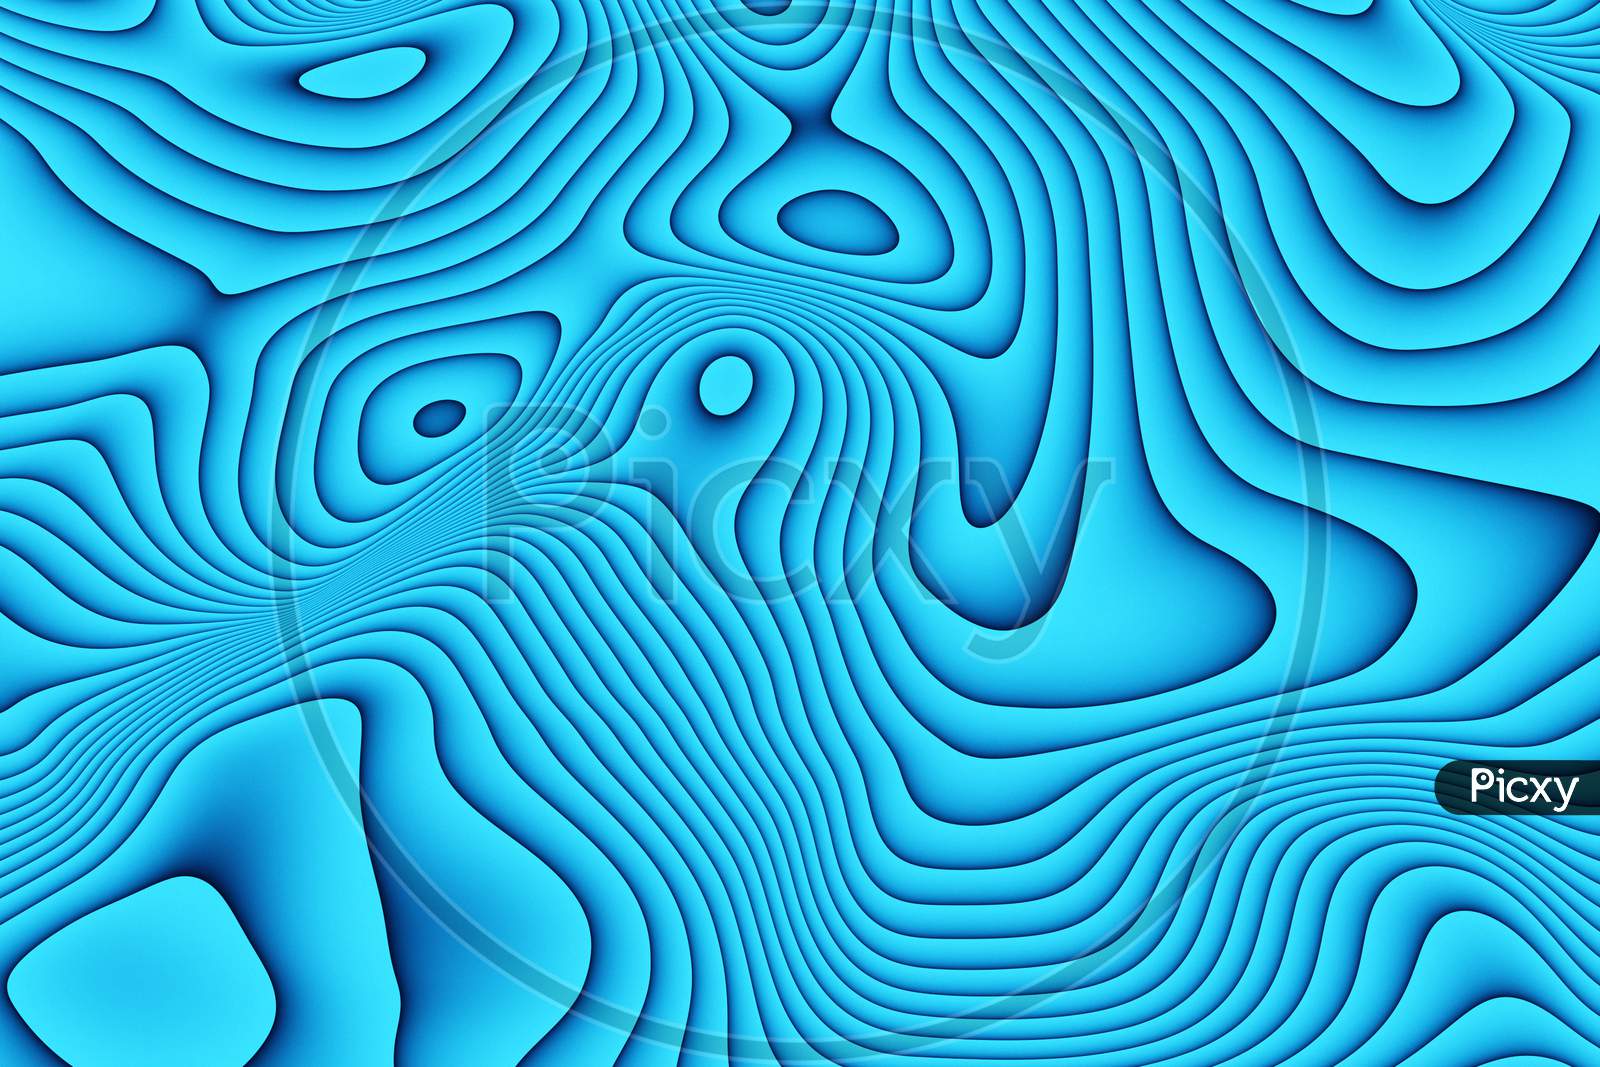 3D Illustration Of A Stereo Blue Strip . Geometric Stripes Similar To Waves. Abstract  Blue Glowing Crossing Lines Pattern